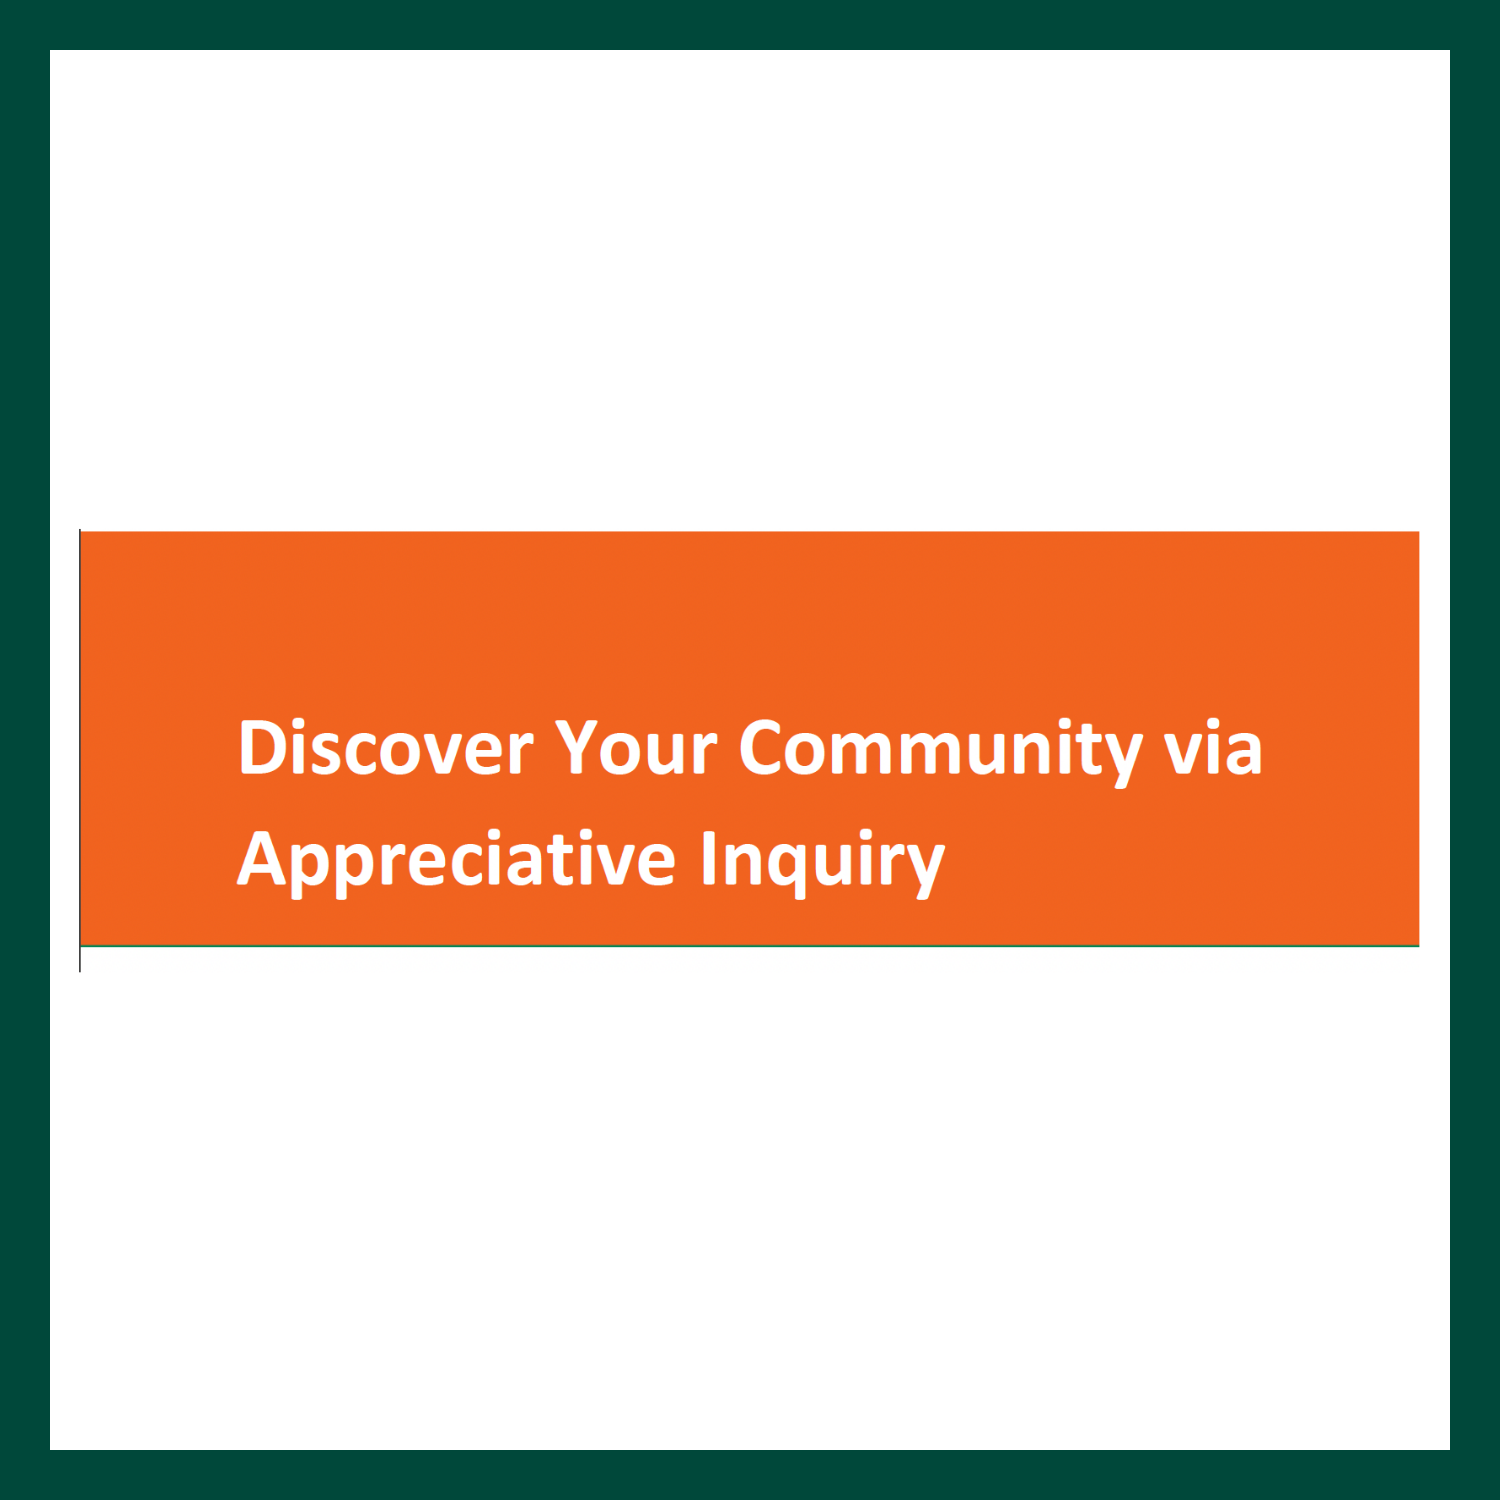 "Discover Your Community via Appreciative Inquiry" written in white with an orange background.